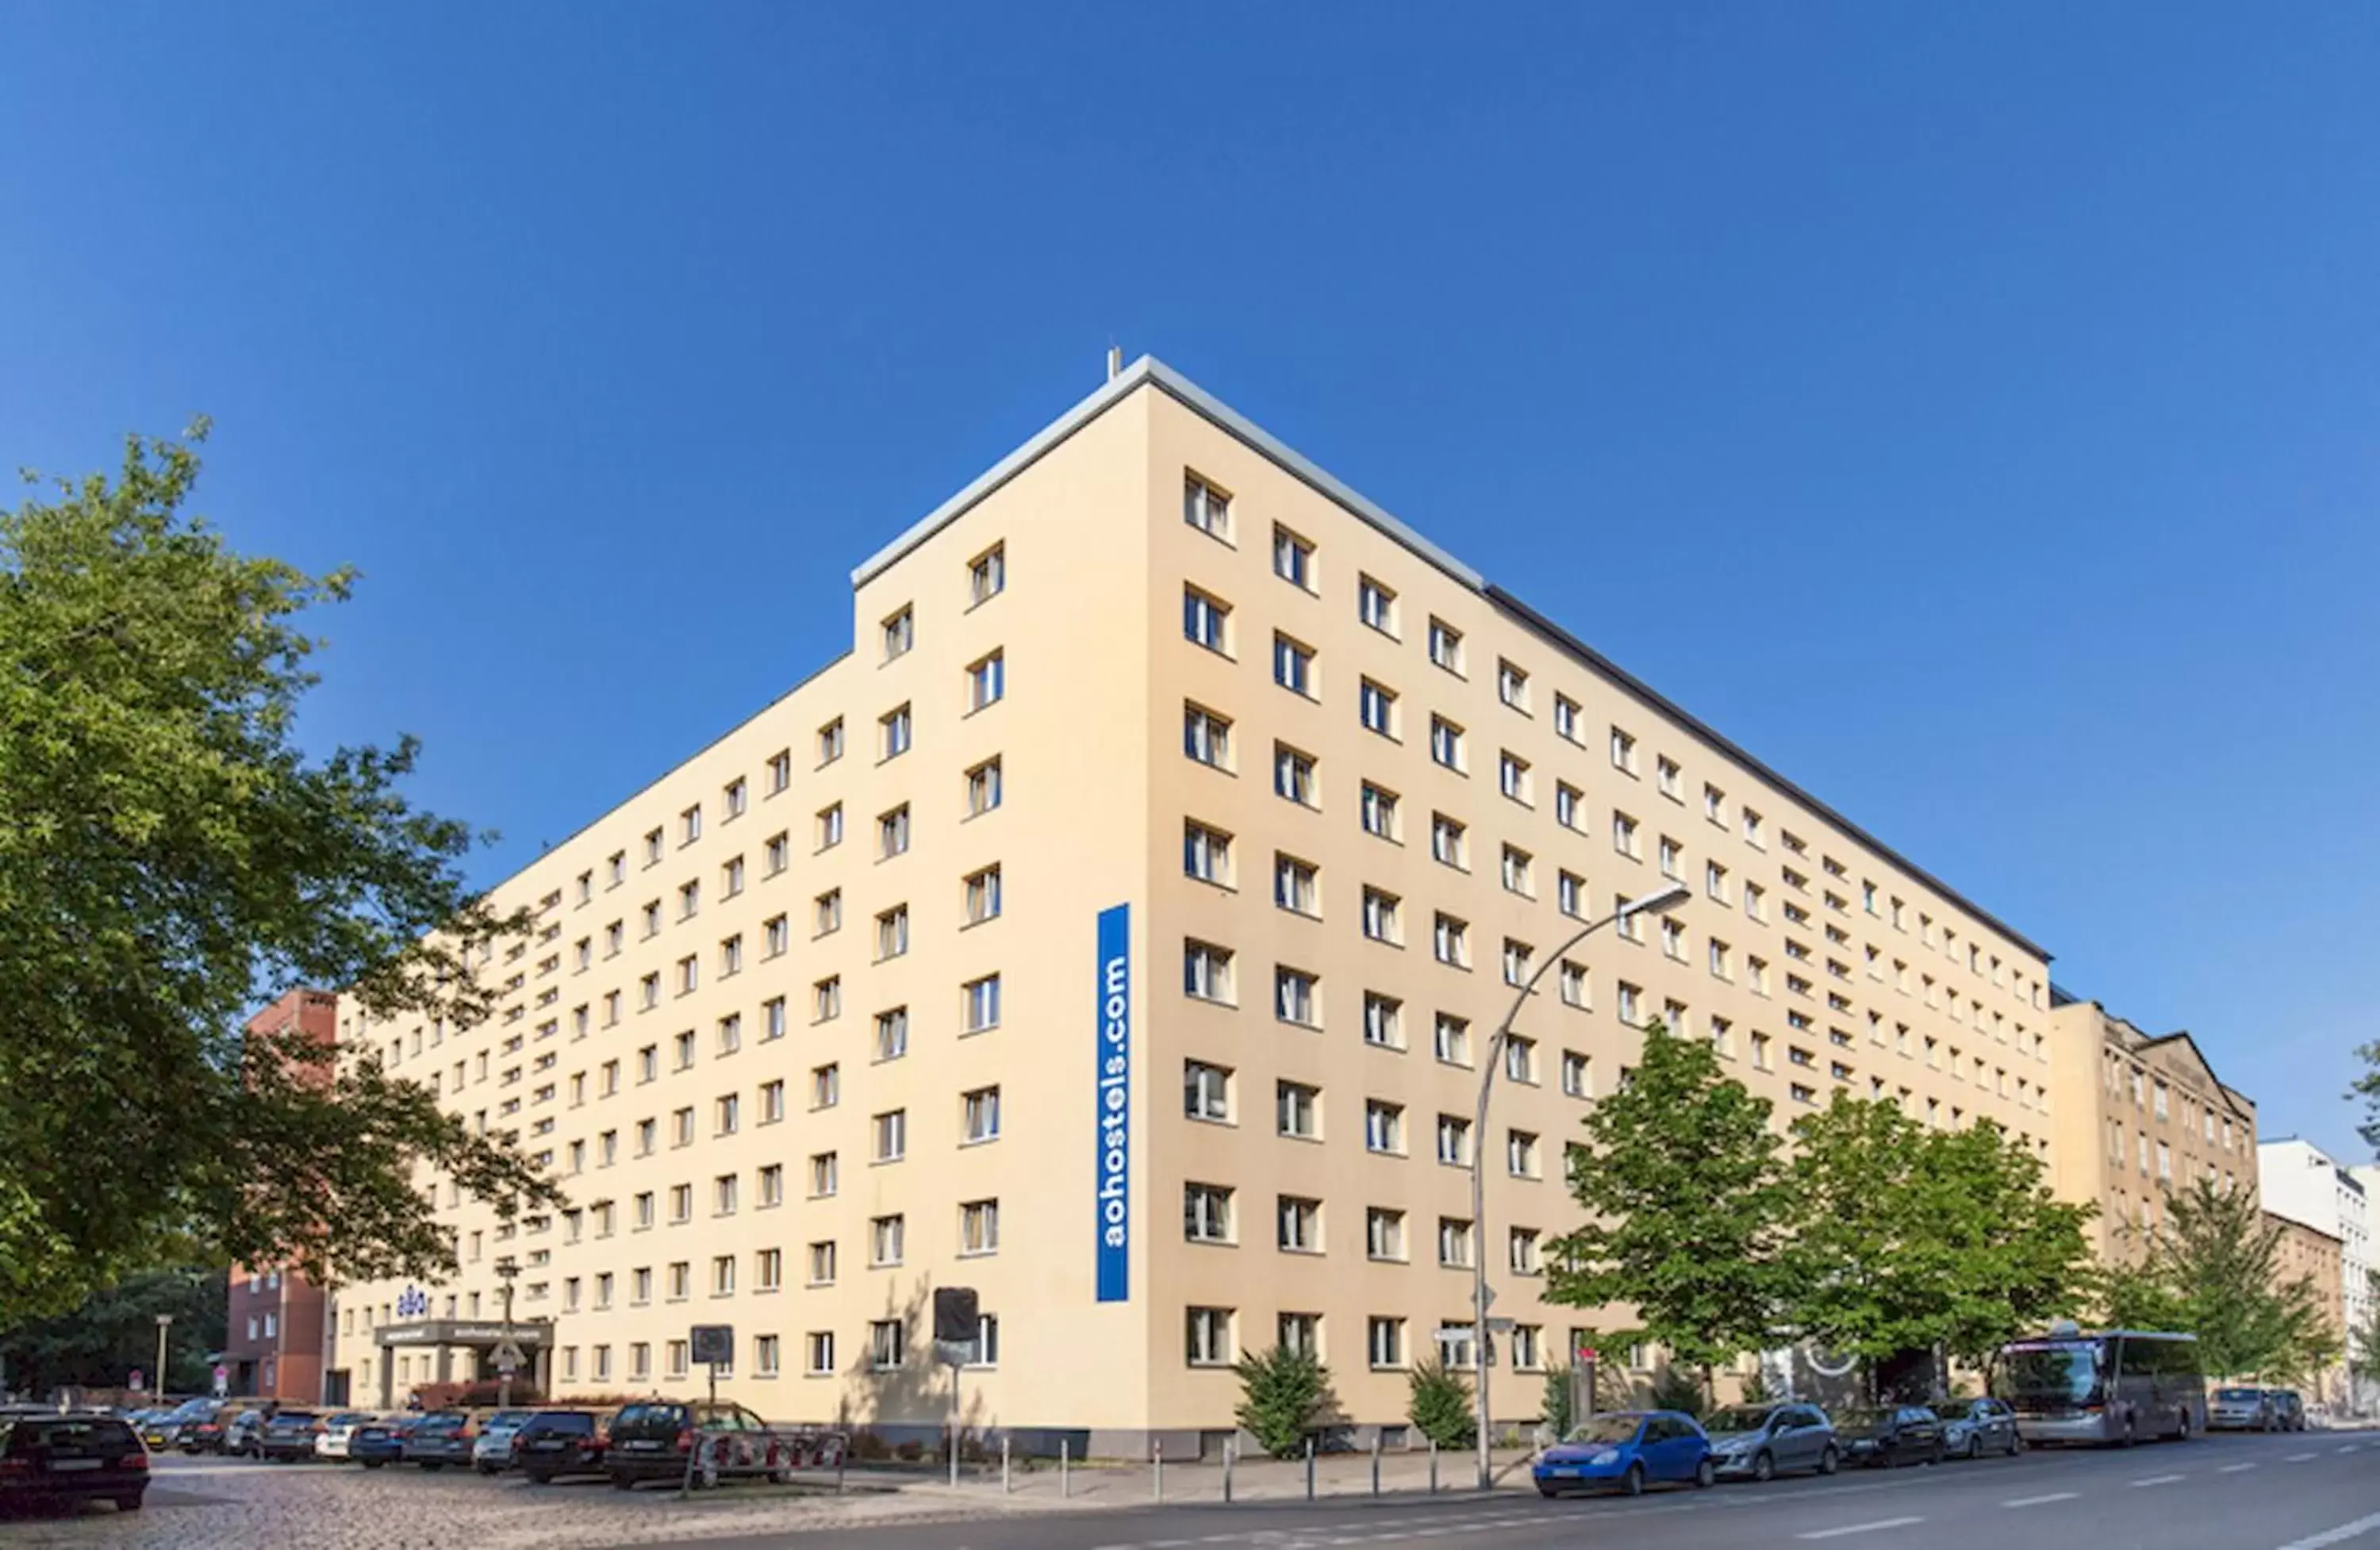 Property Building in A&O Berlin Mitte